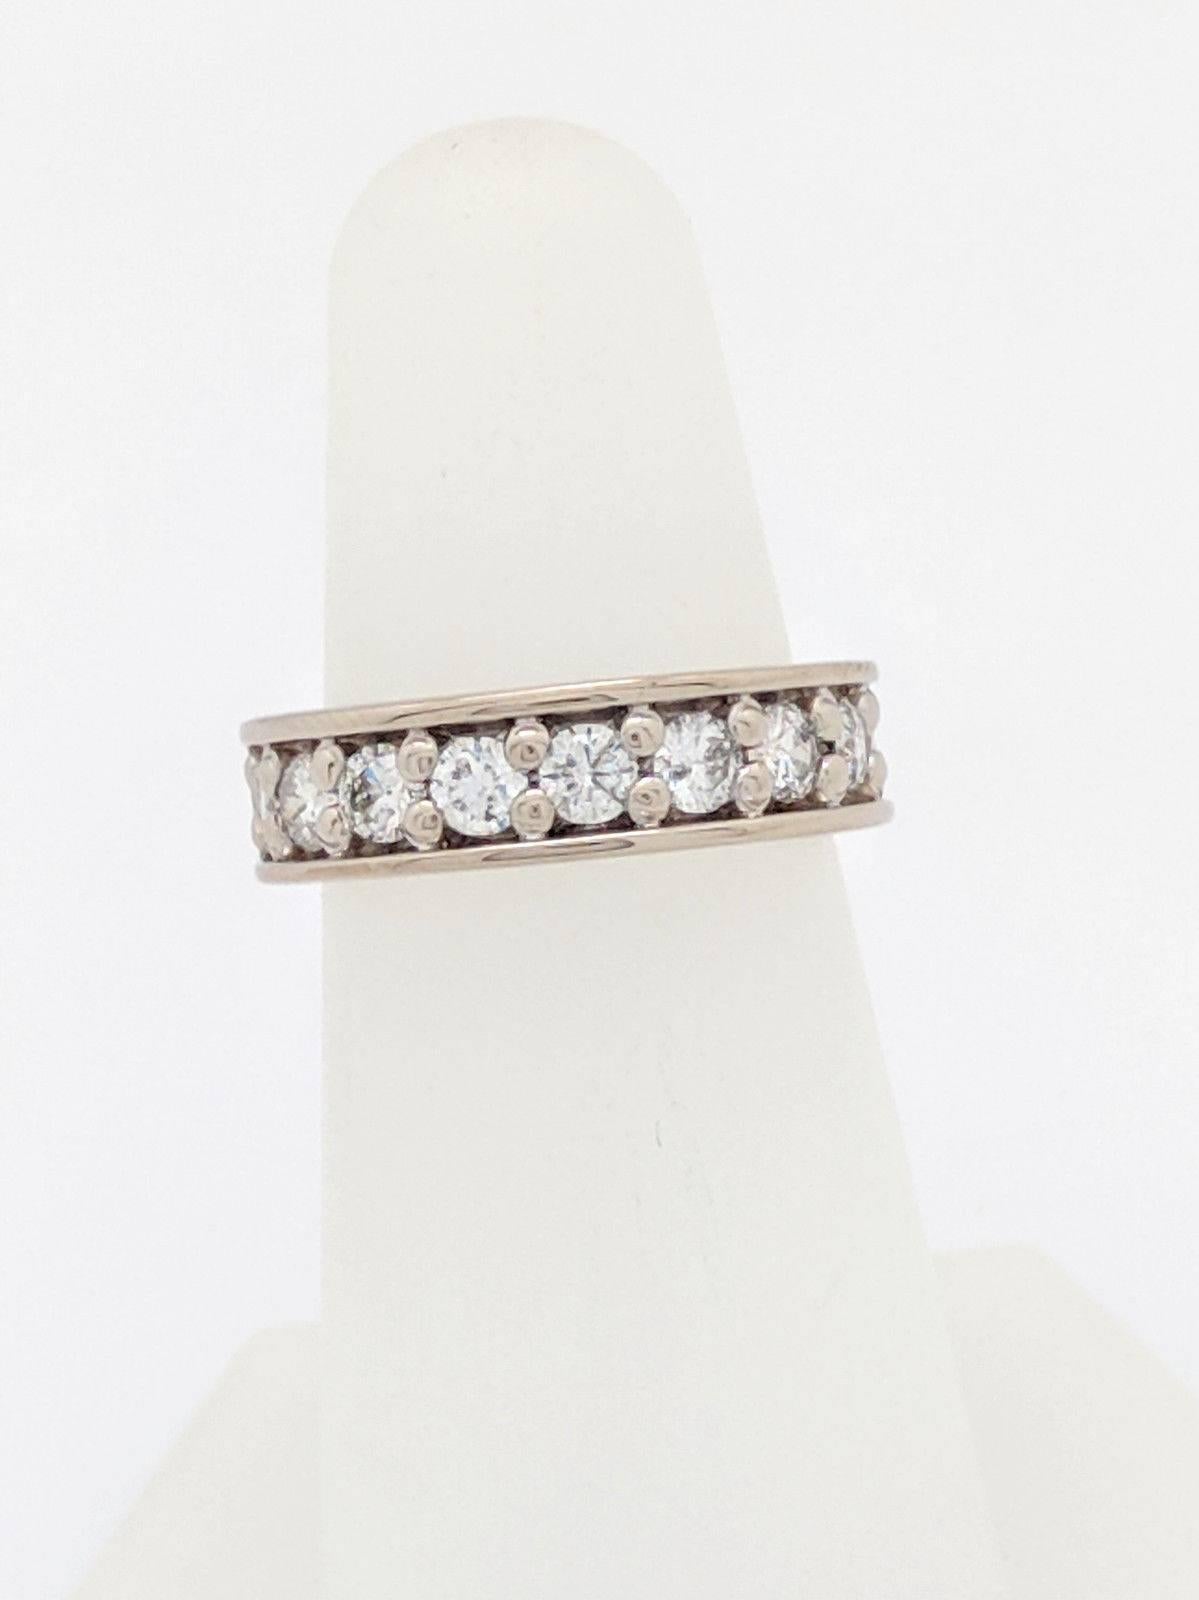 Ladies 14K White Gold 1ctw Prong Set Diamond Wedding Band Ring Size 5.5

You are viewing a beautiful prong set diamond wedding band. This band is crafted from 14K white gold and weighs 4.5 grams. This ring features (9) natural round brilliant cut